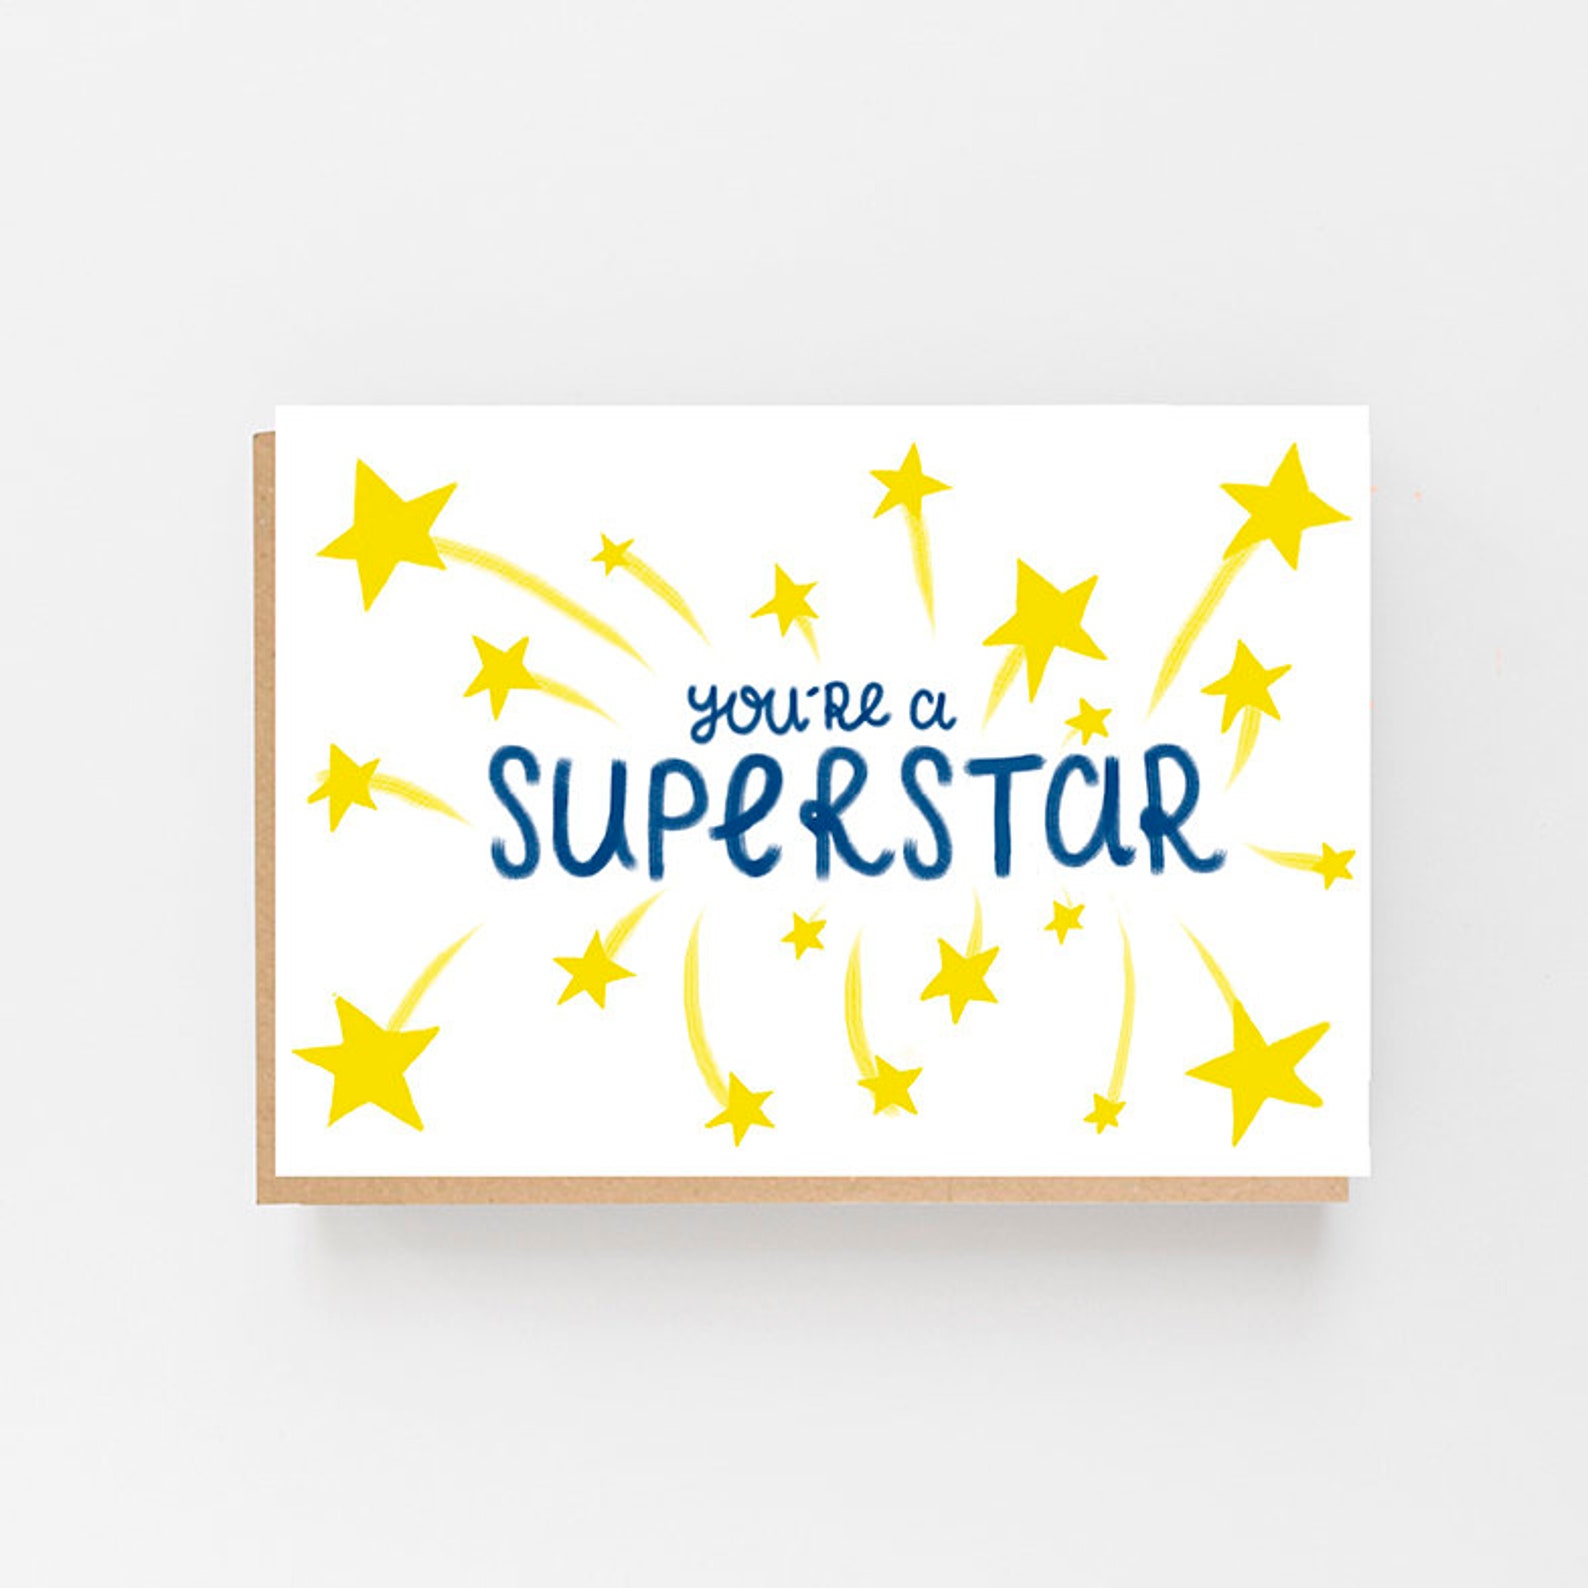 Thank stars. Super Star Card. You are Superstar. You are my Superstar момент прохождения Нептуна. A quality Cards Superstar.